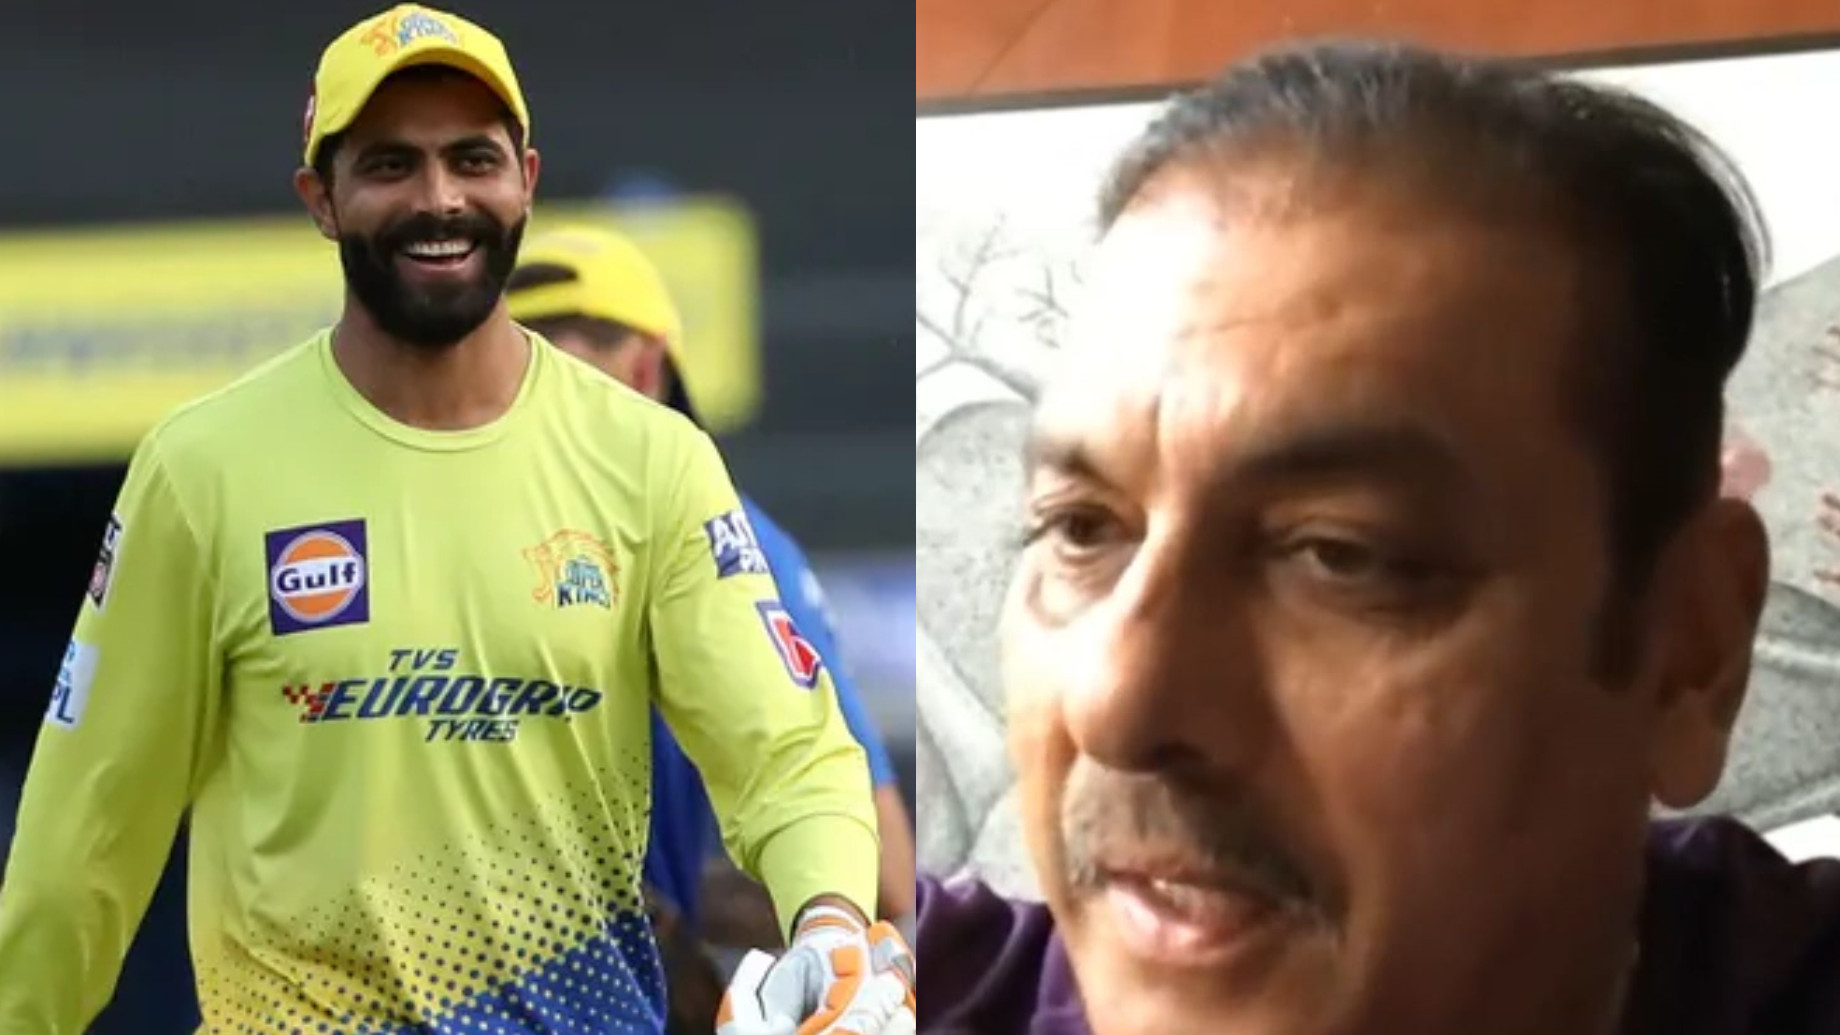 IPL 2022: WATCH- 'From one Ravi to another'- Ravi Shastri wishes Ravindra Jadeja good luck on CSK captaincy debut